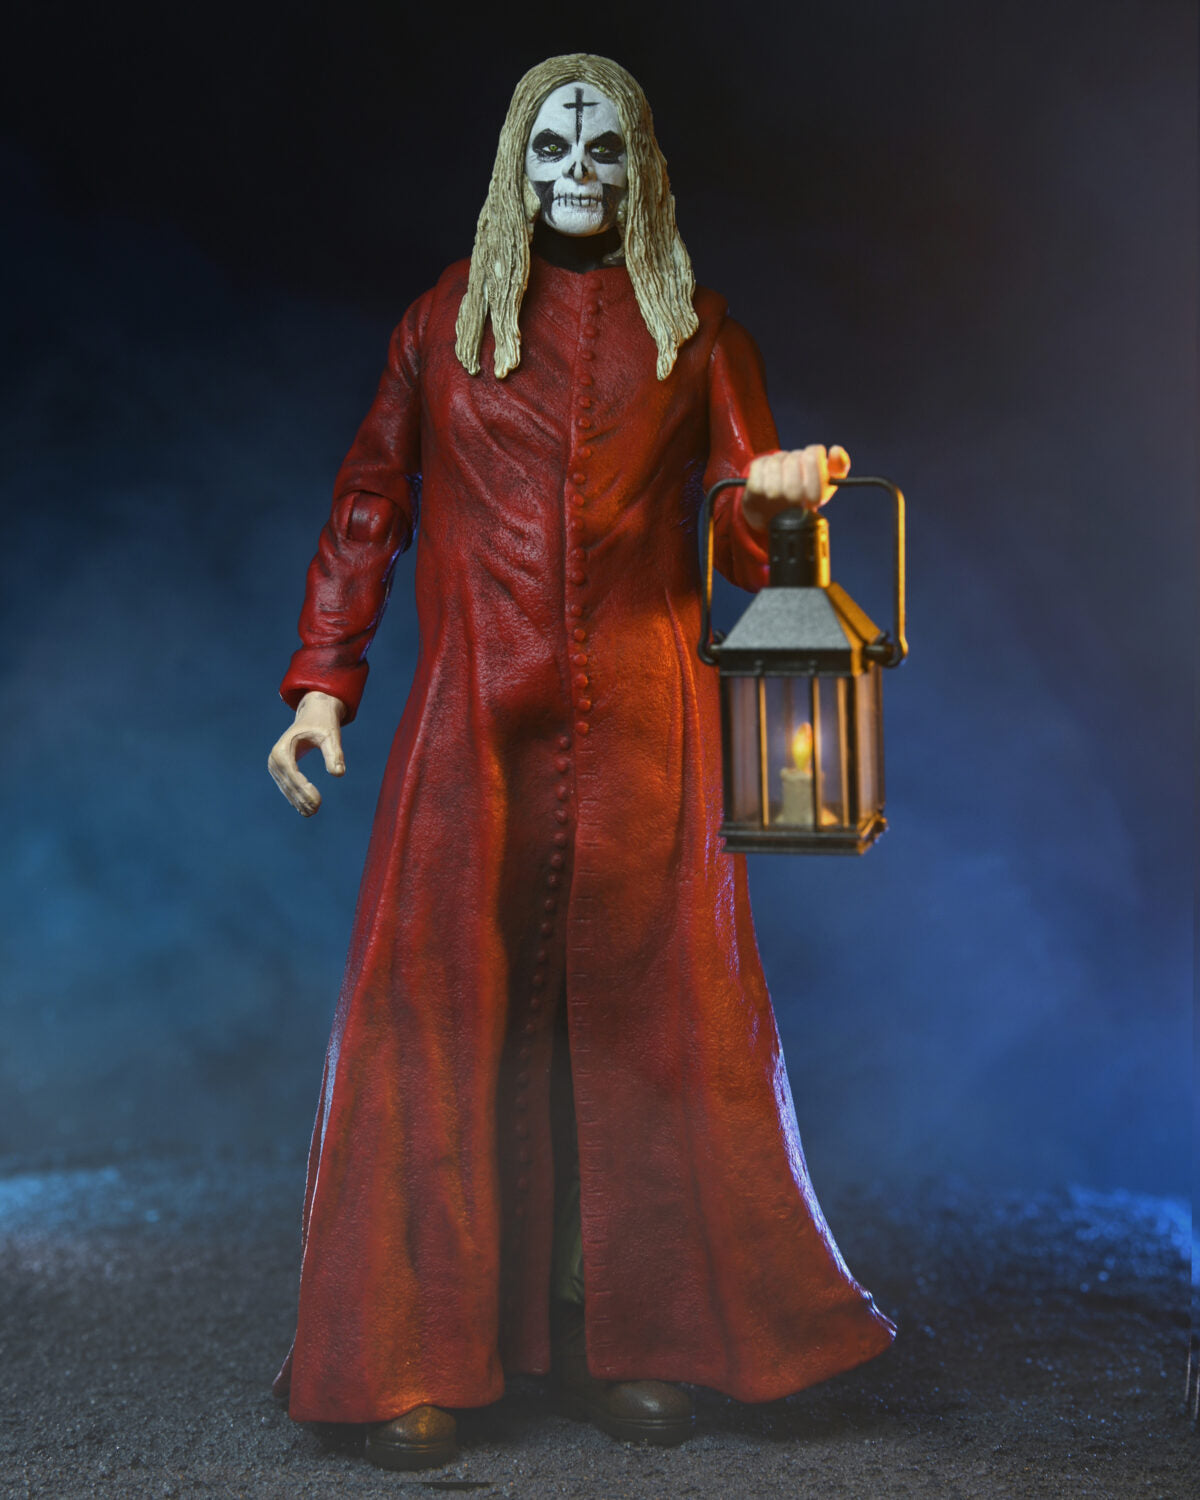 PRE-ORDER House of 1000 Corpses 7″ Scale Action Figure – Otis (Red Robe) 20th Anniversary